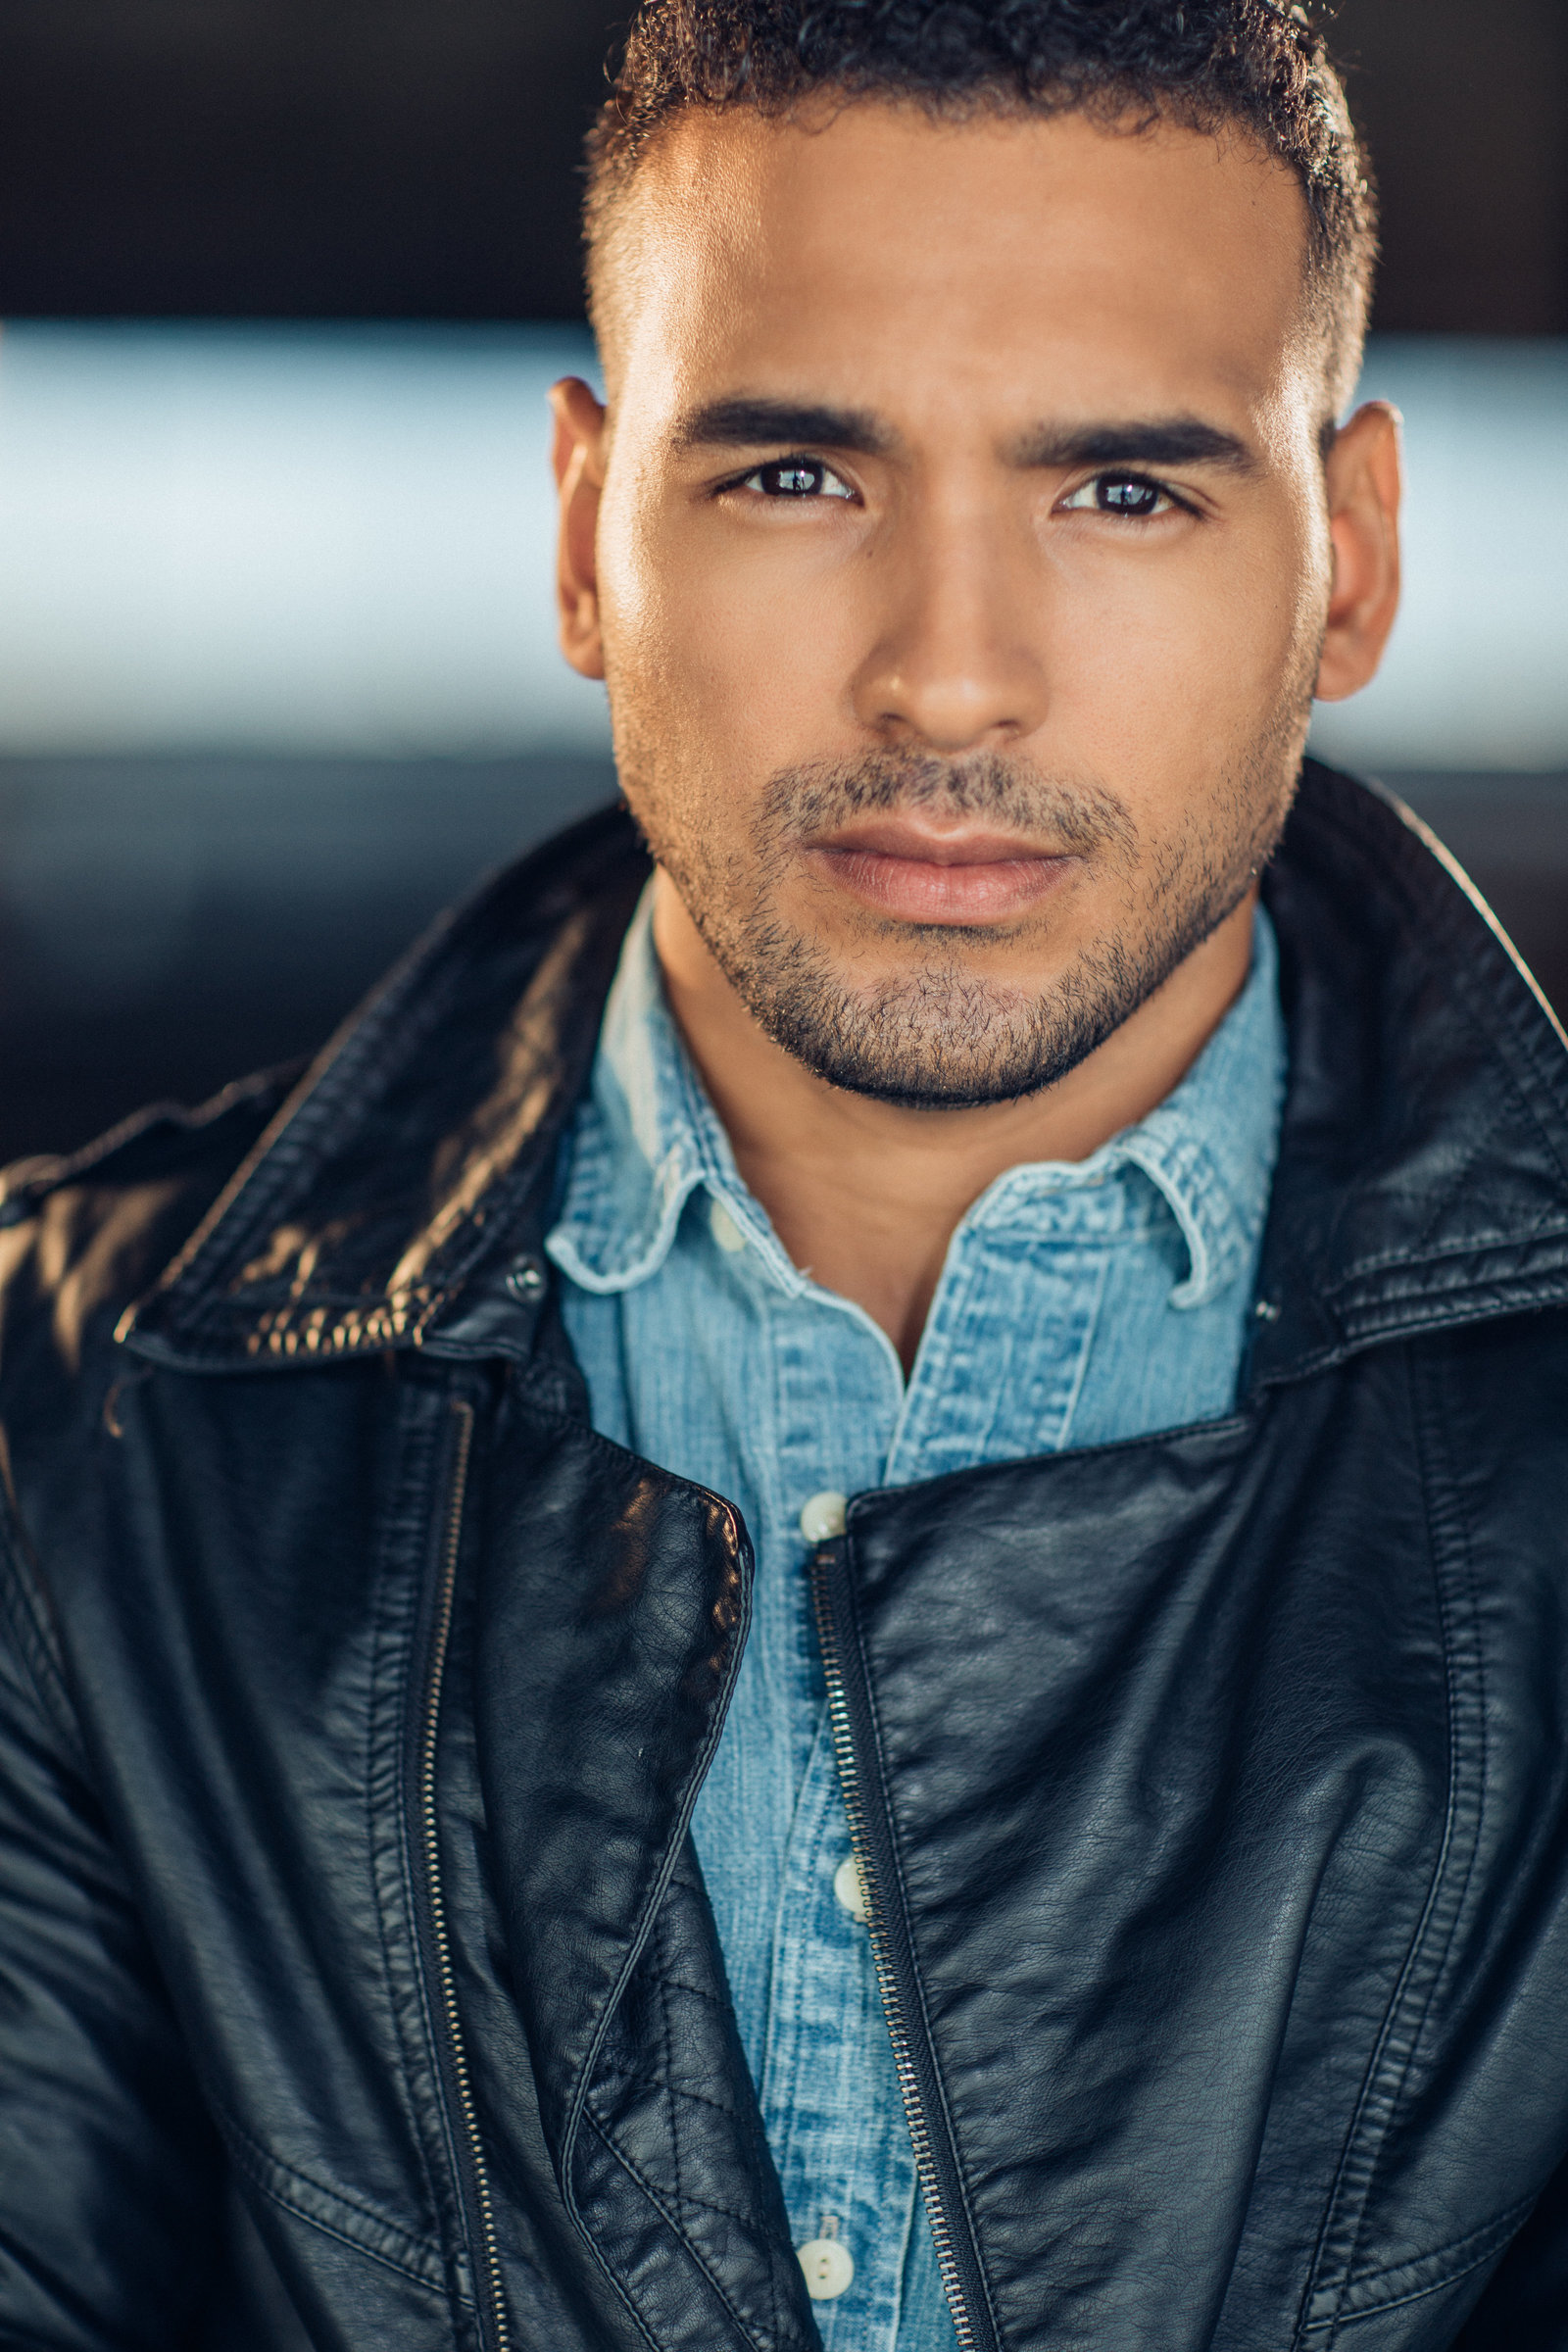 Headshot Photo Of Young Man In Outer Black Leather Jacket And Inner Blue Denim Polo